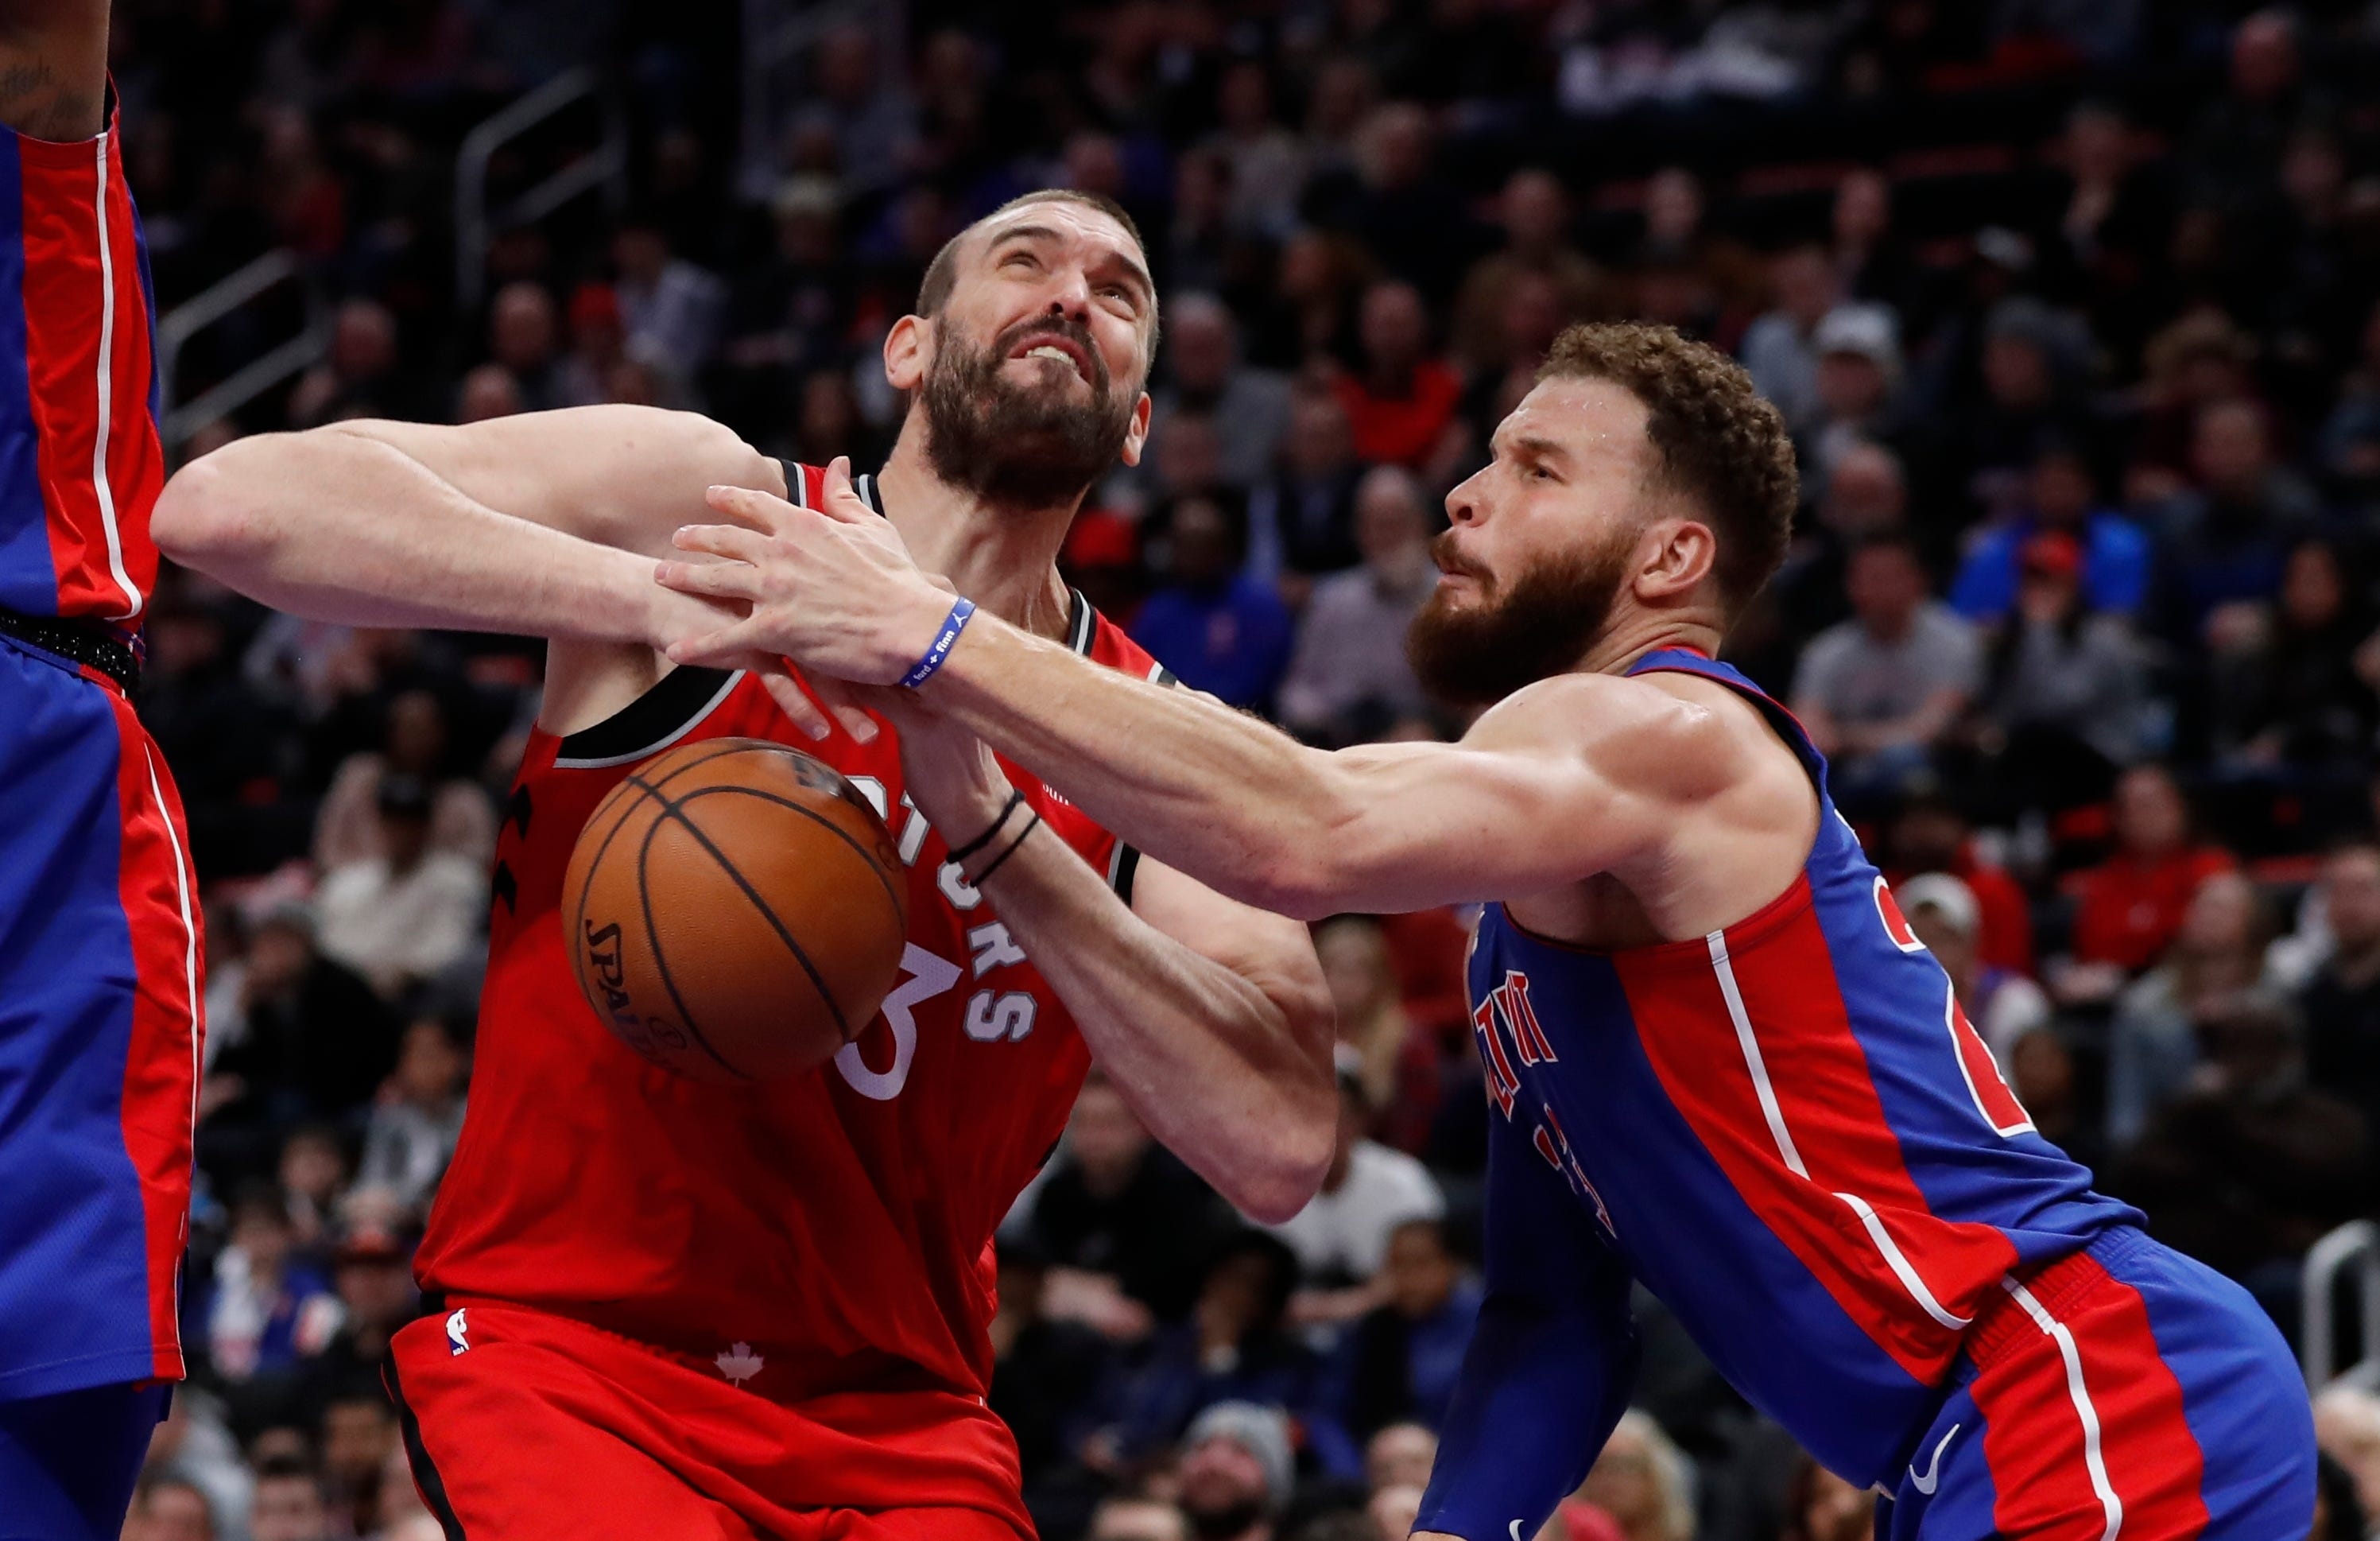 Detroit Pistons forward Blake Griffin knocks the ball away from Toronto Raptors center Marc Gasol (33) during the second half.